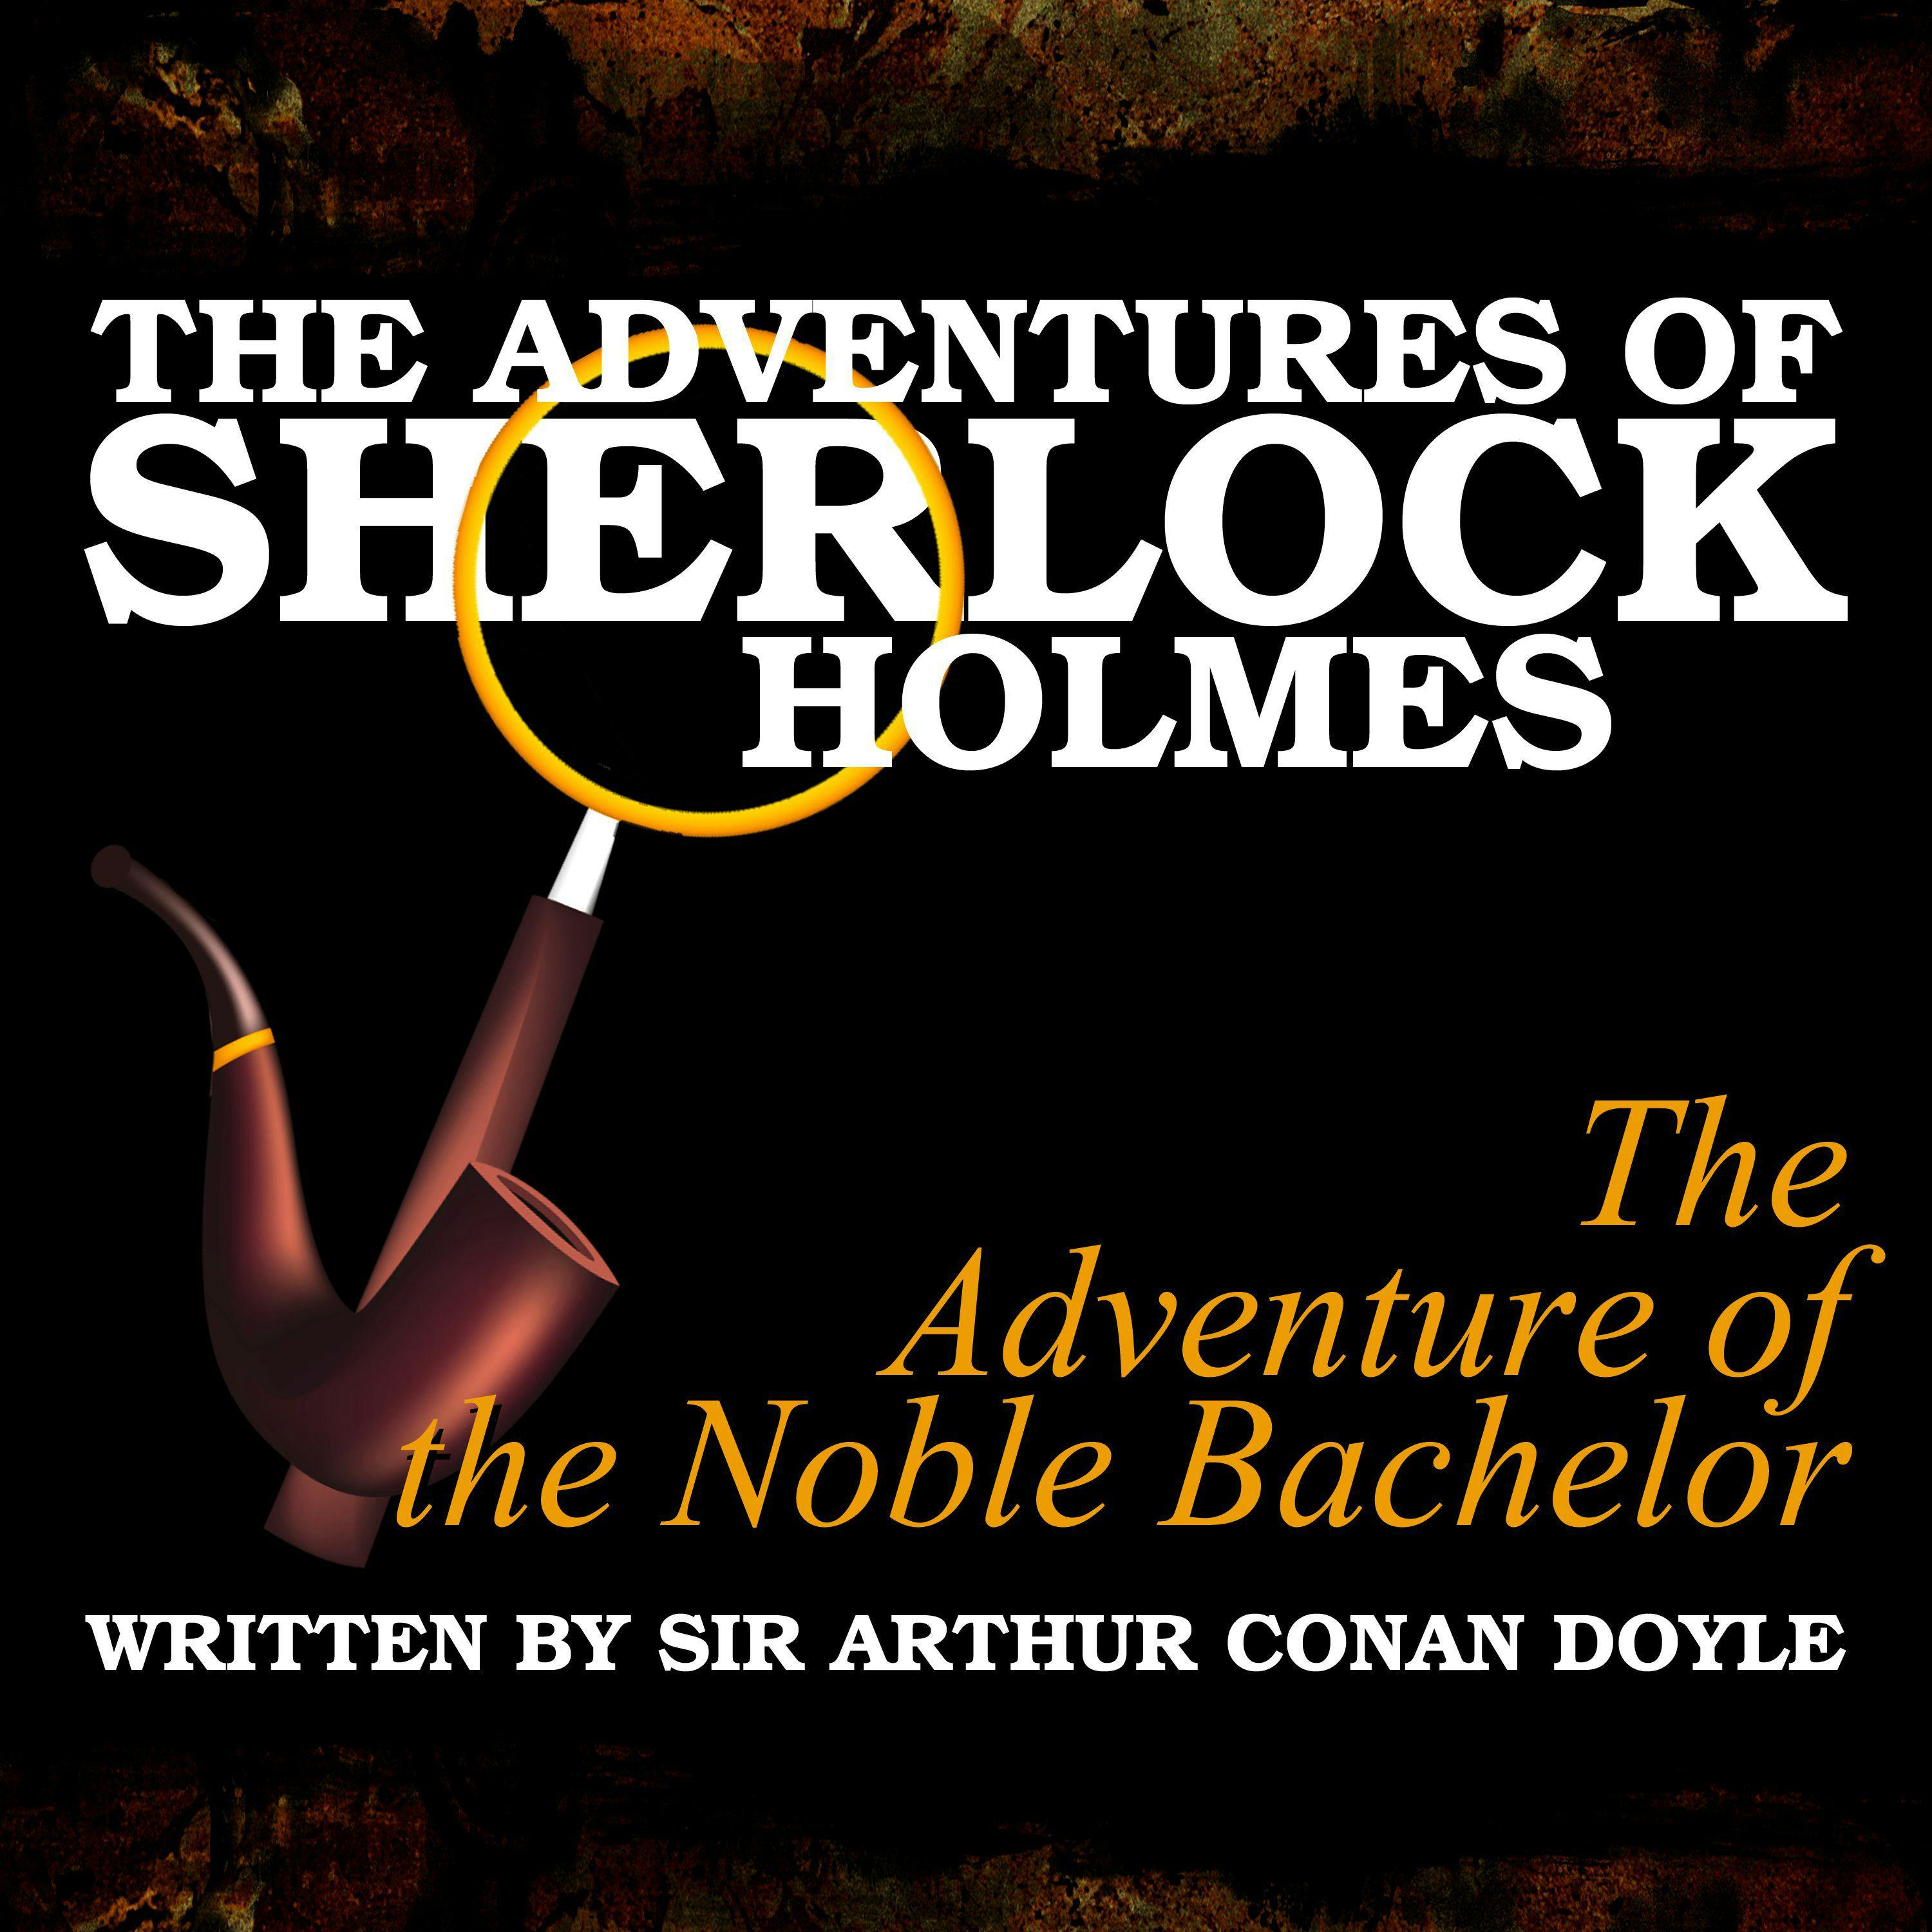 The Adventures of Sherlock Holmes: The Adventure of the Noble Bachelor - undefined